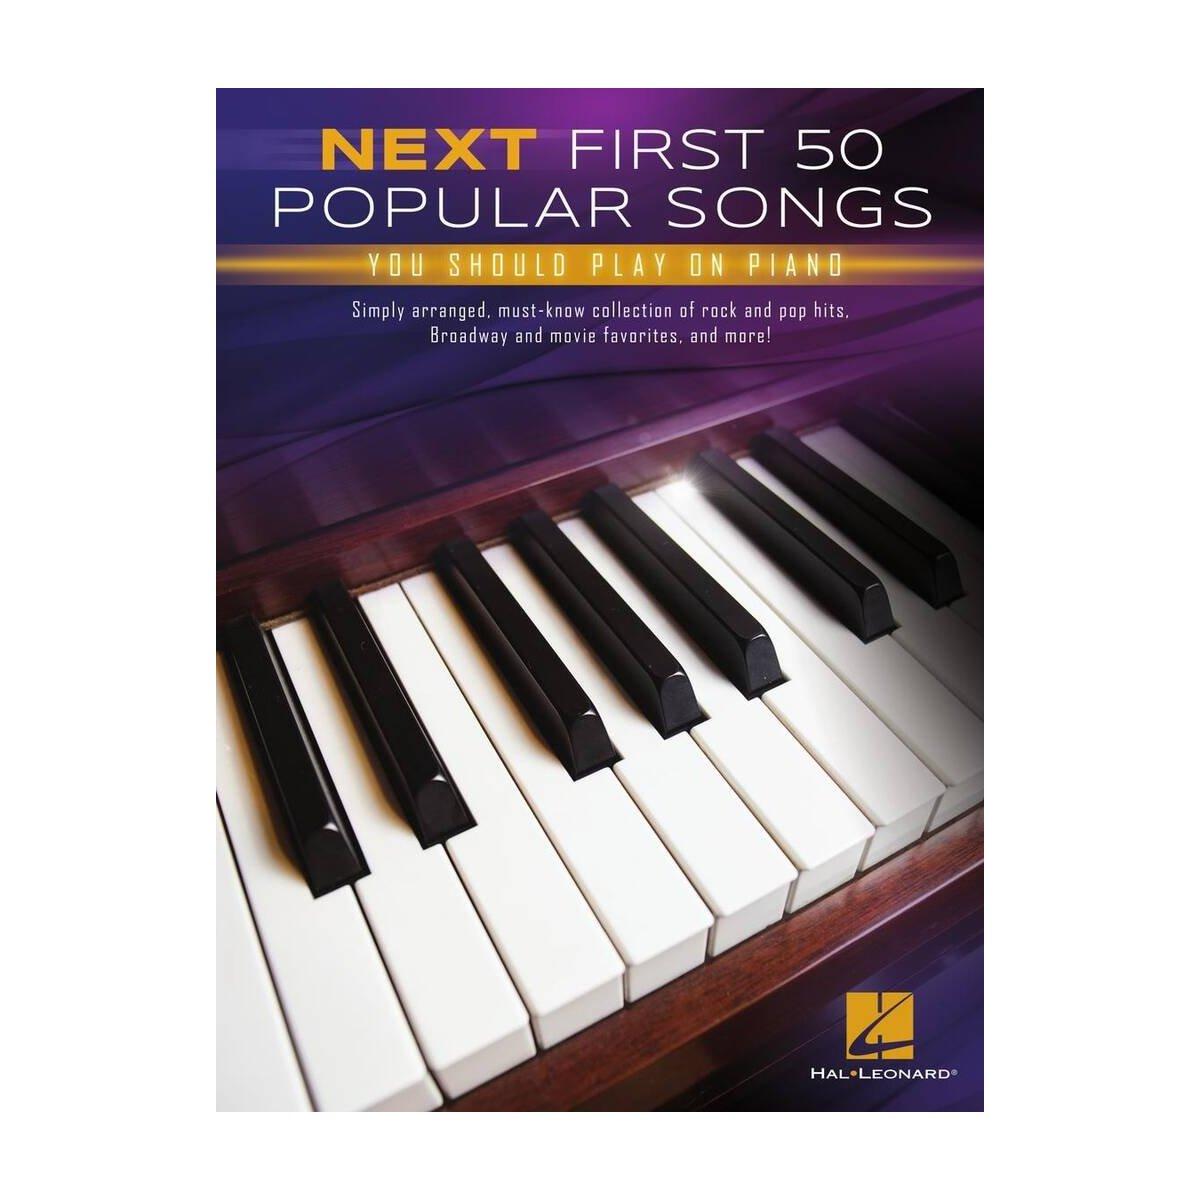 Nexy fist 50 popular songs you should play pianoforte